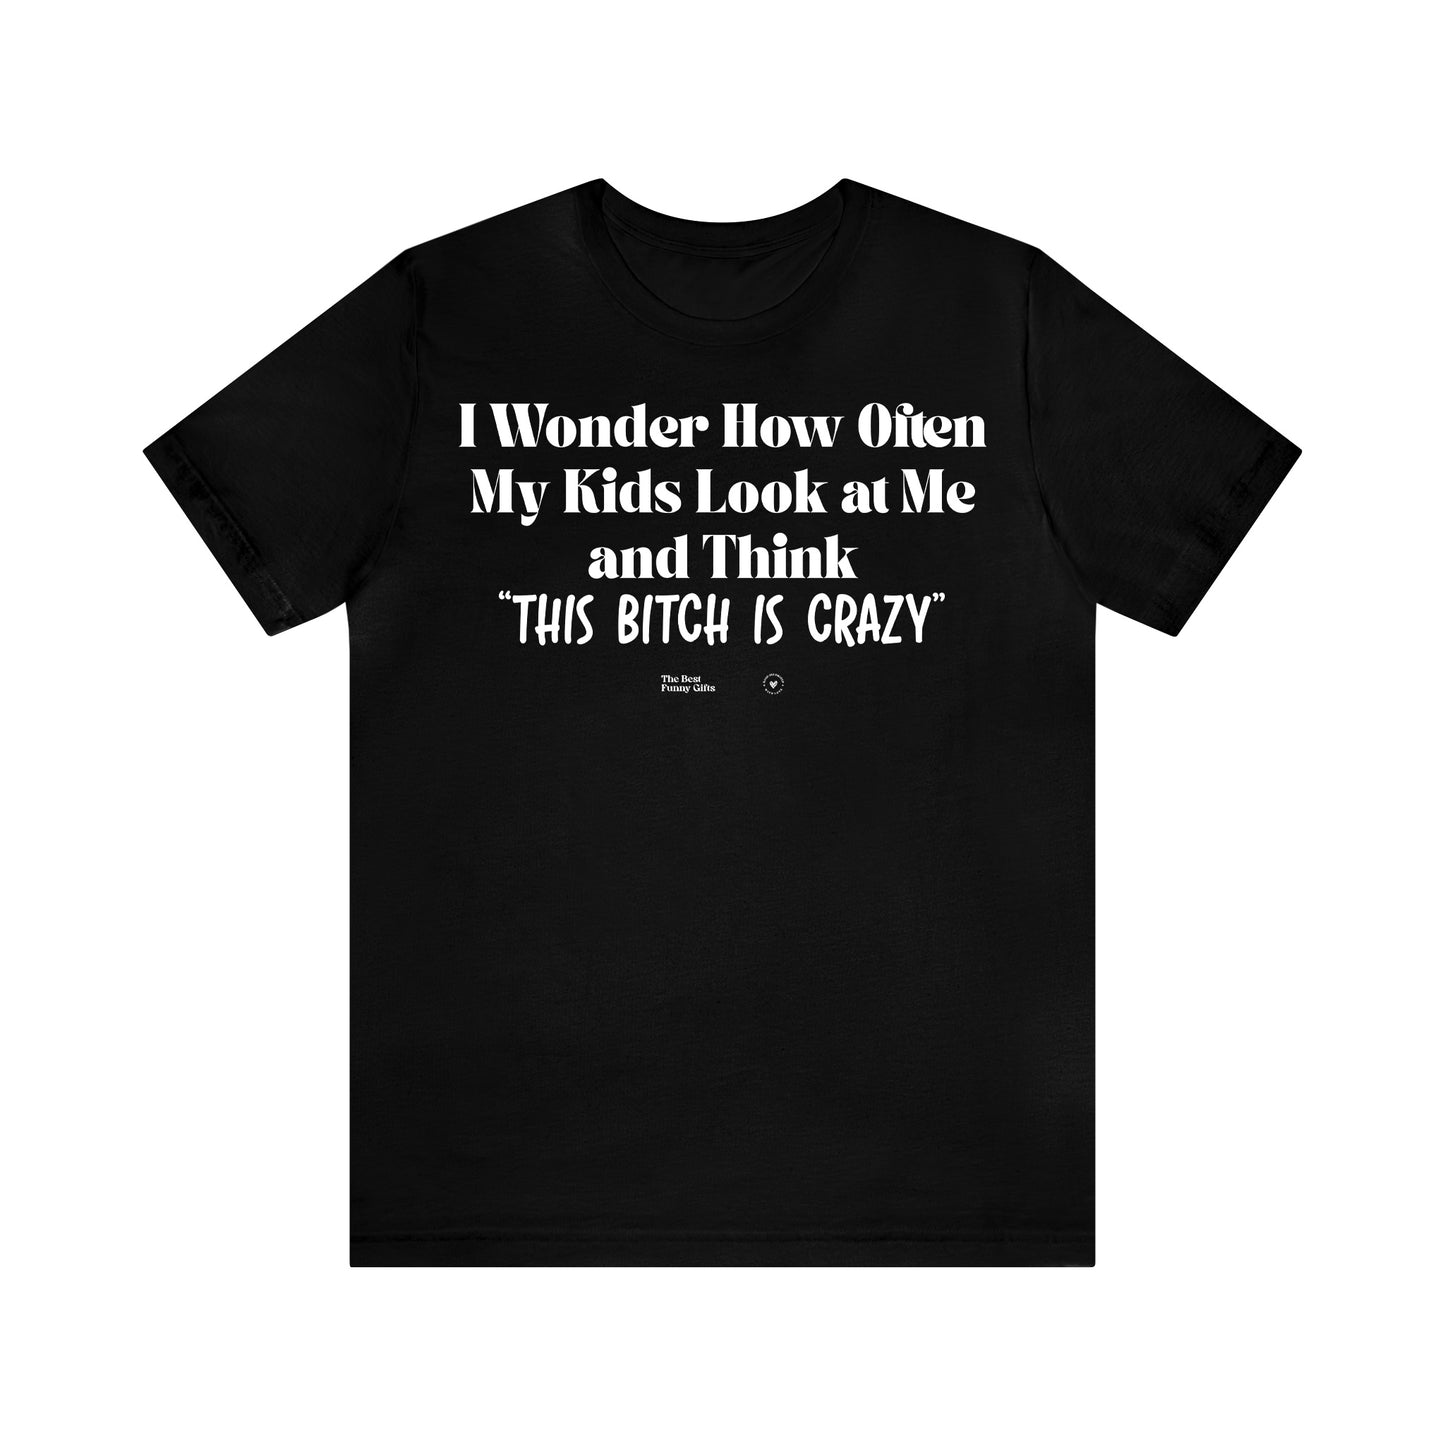 Funny Shirts for Women - I Wonder How Often My Kids Look at Me and Think "This Bitch is Crazy" - Women’s T Shirts